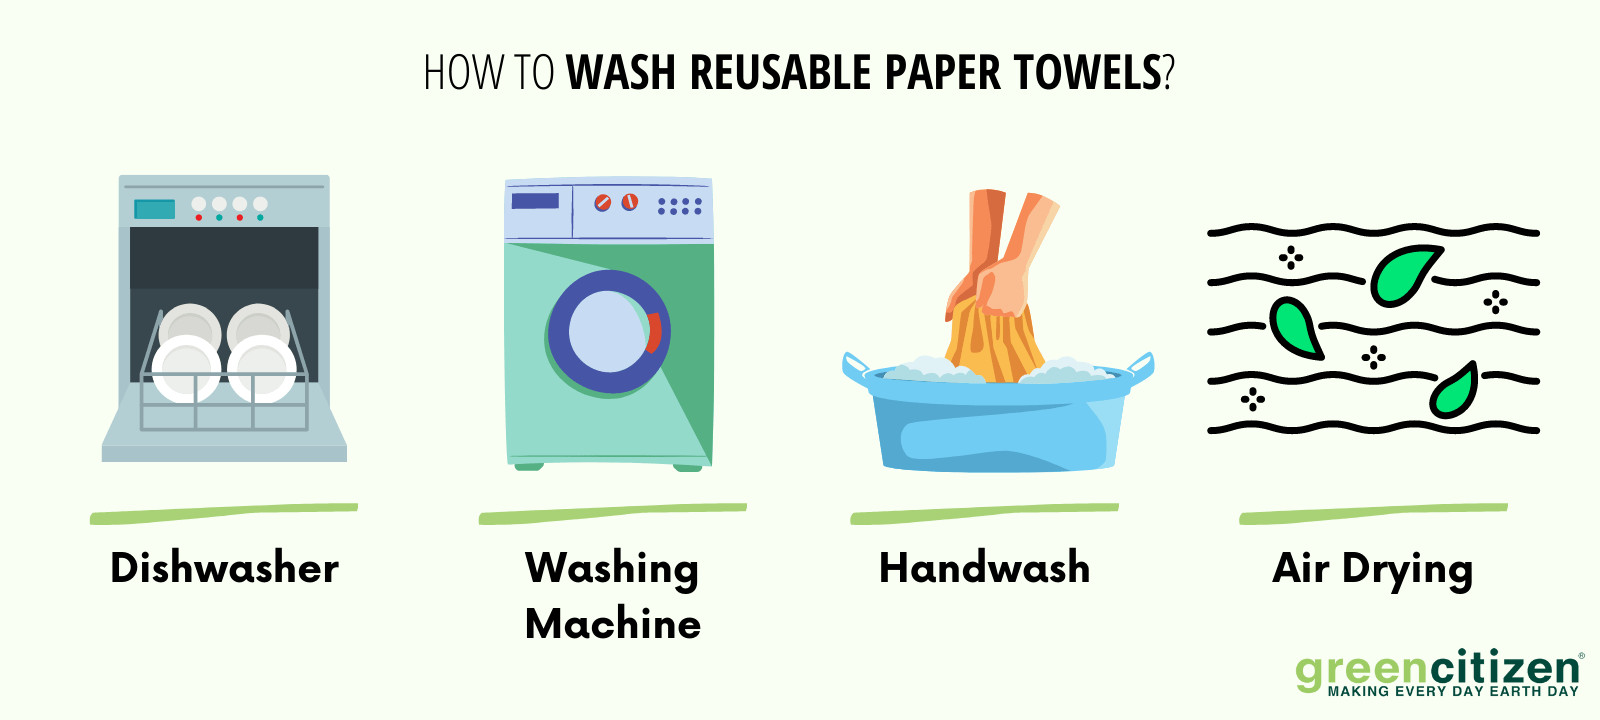 How to Wash Reusable Paper Towels